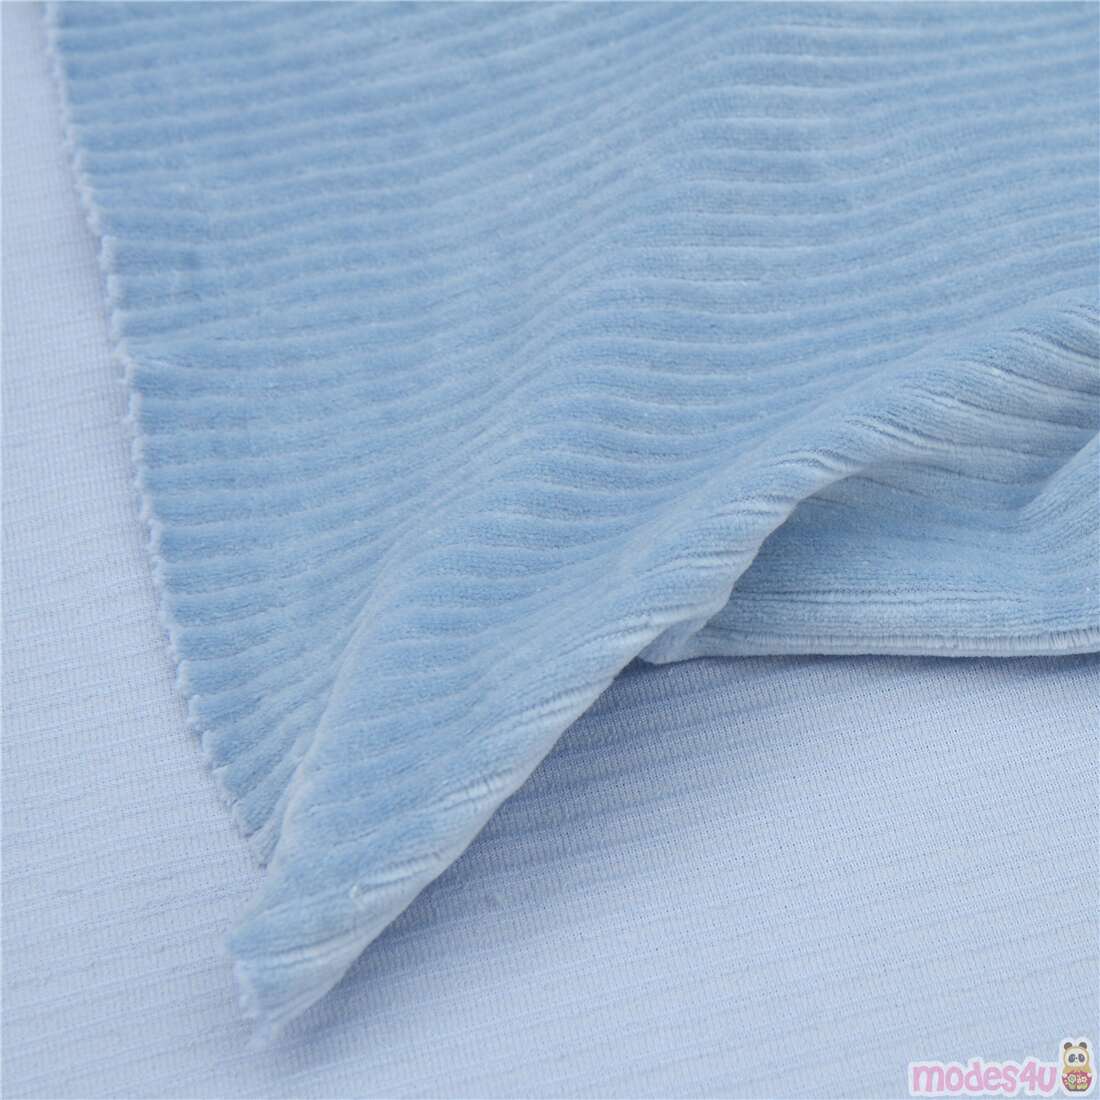 Avalana Velour Corduroy knit fabric in solid light blue by Stof Fabrics ...